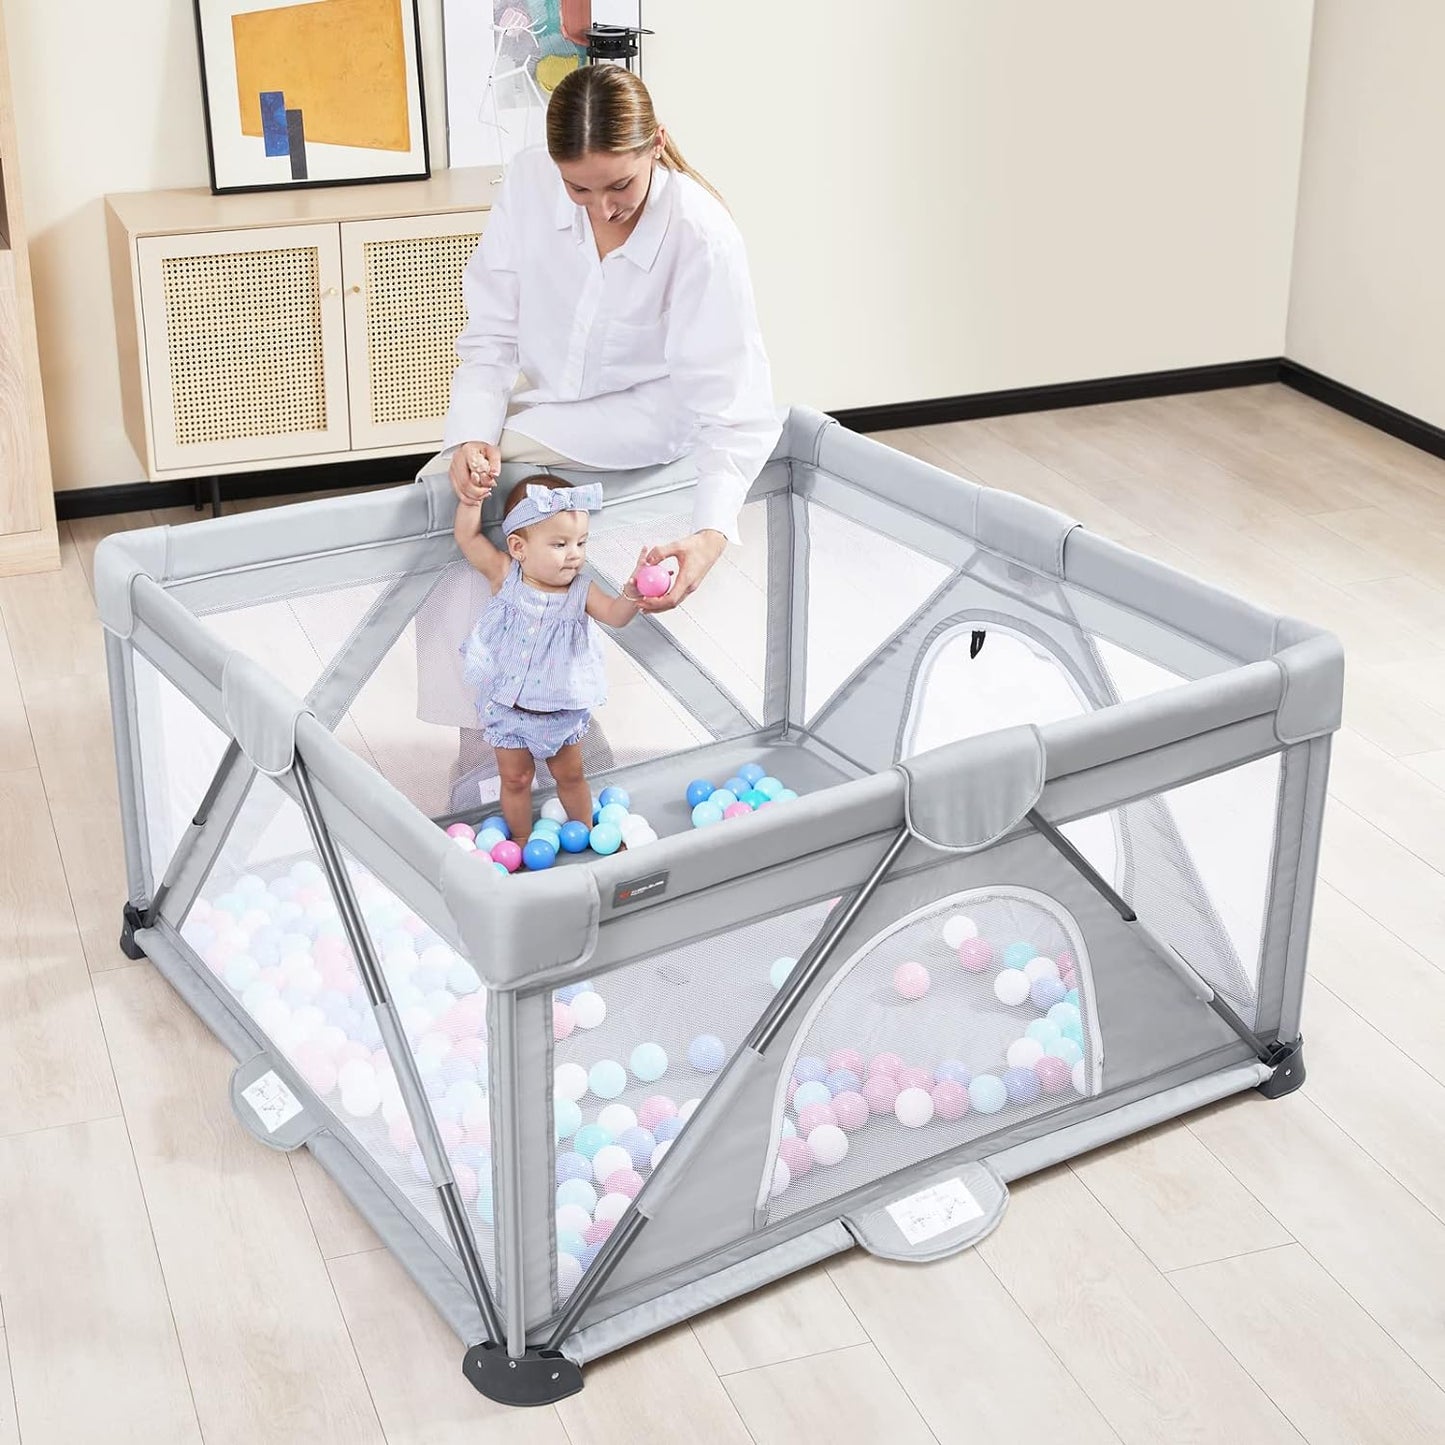 Gray visible breathable mesh baby playpen with 2 Handlers + 50 balls